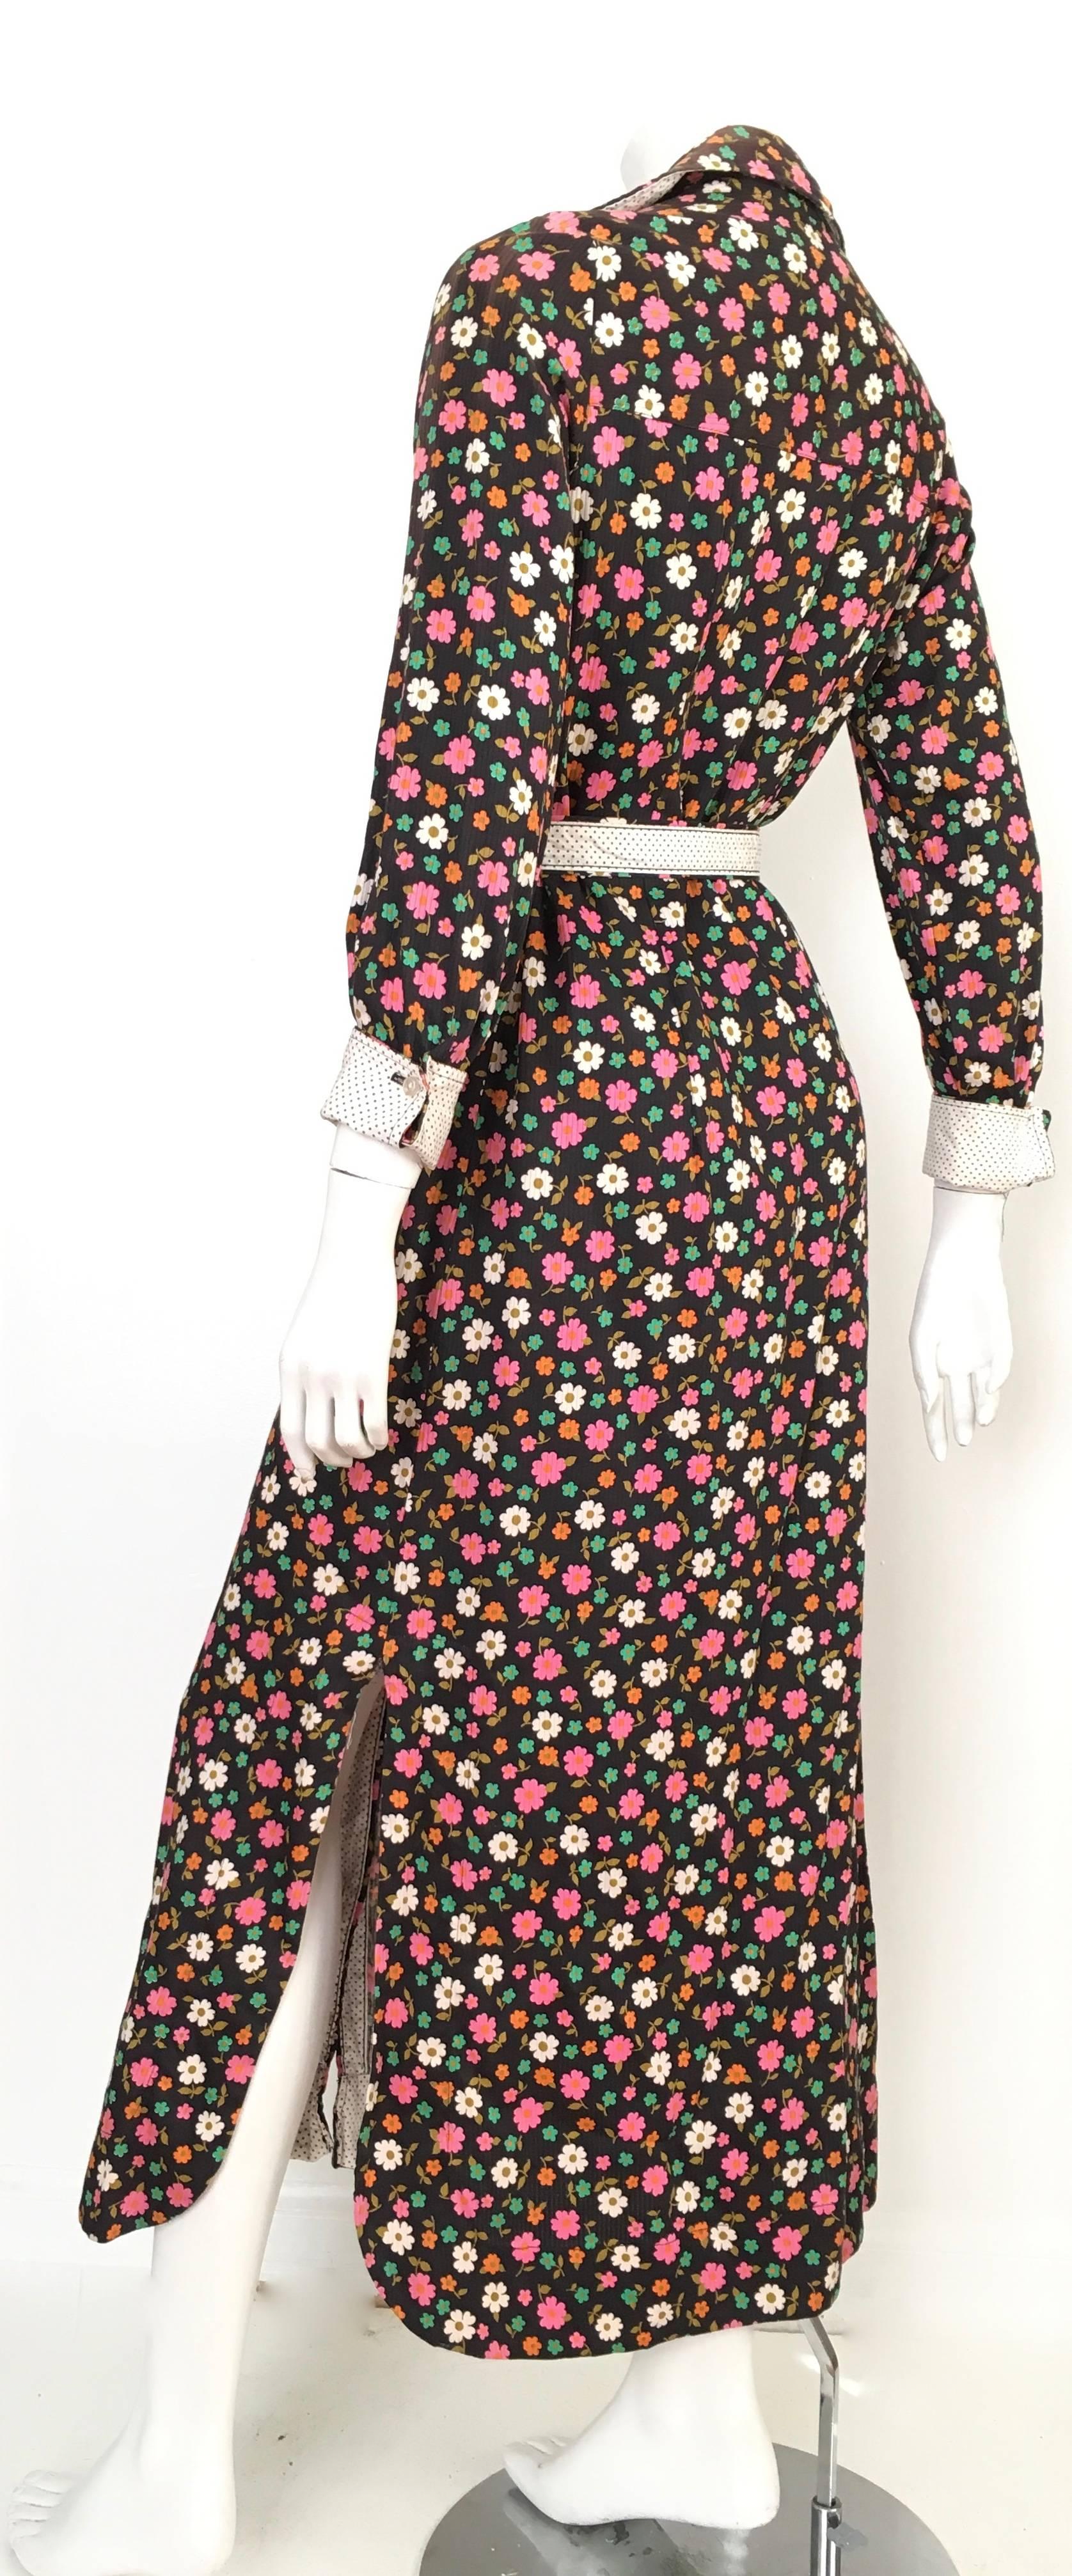 Women's or Men's Geoffrey Beene 1960s Floral Cotton Button Up Dress with Belt Size 8. For Sale